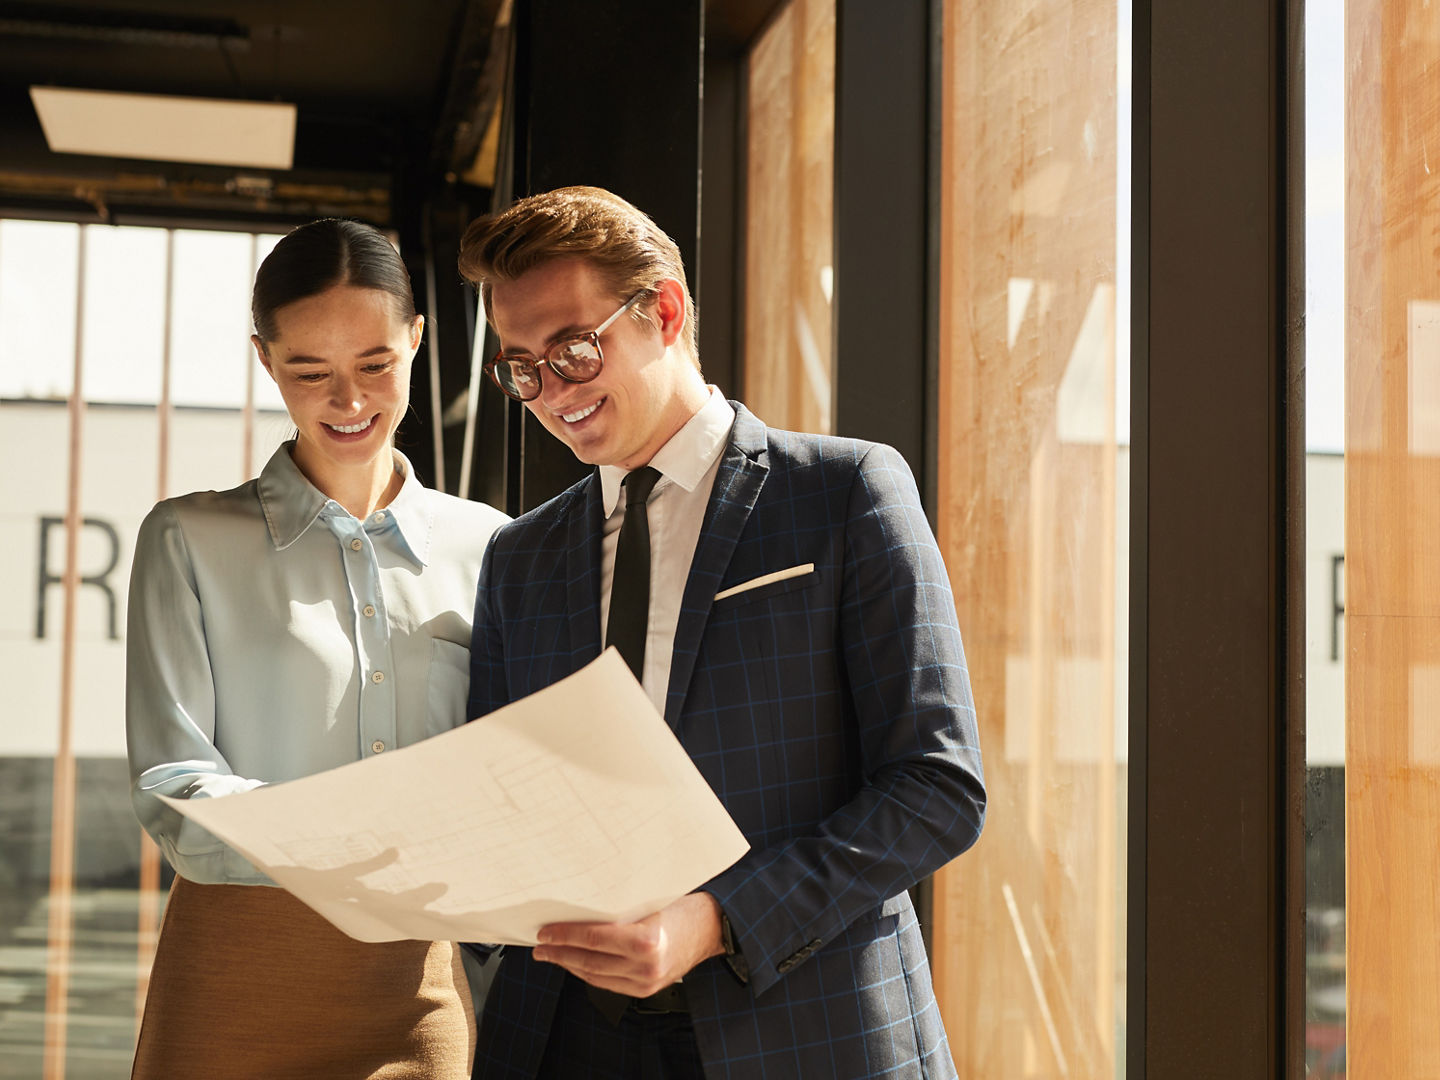 Waist up portrait of smiling rental agent showing floor plans to female client while standing in office building interior lit by sunlight, copy space